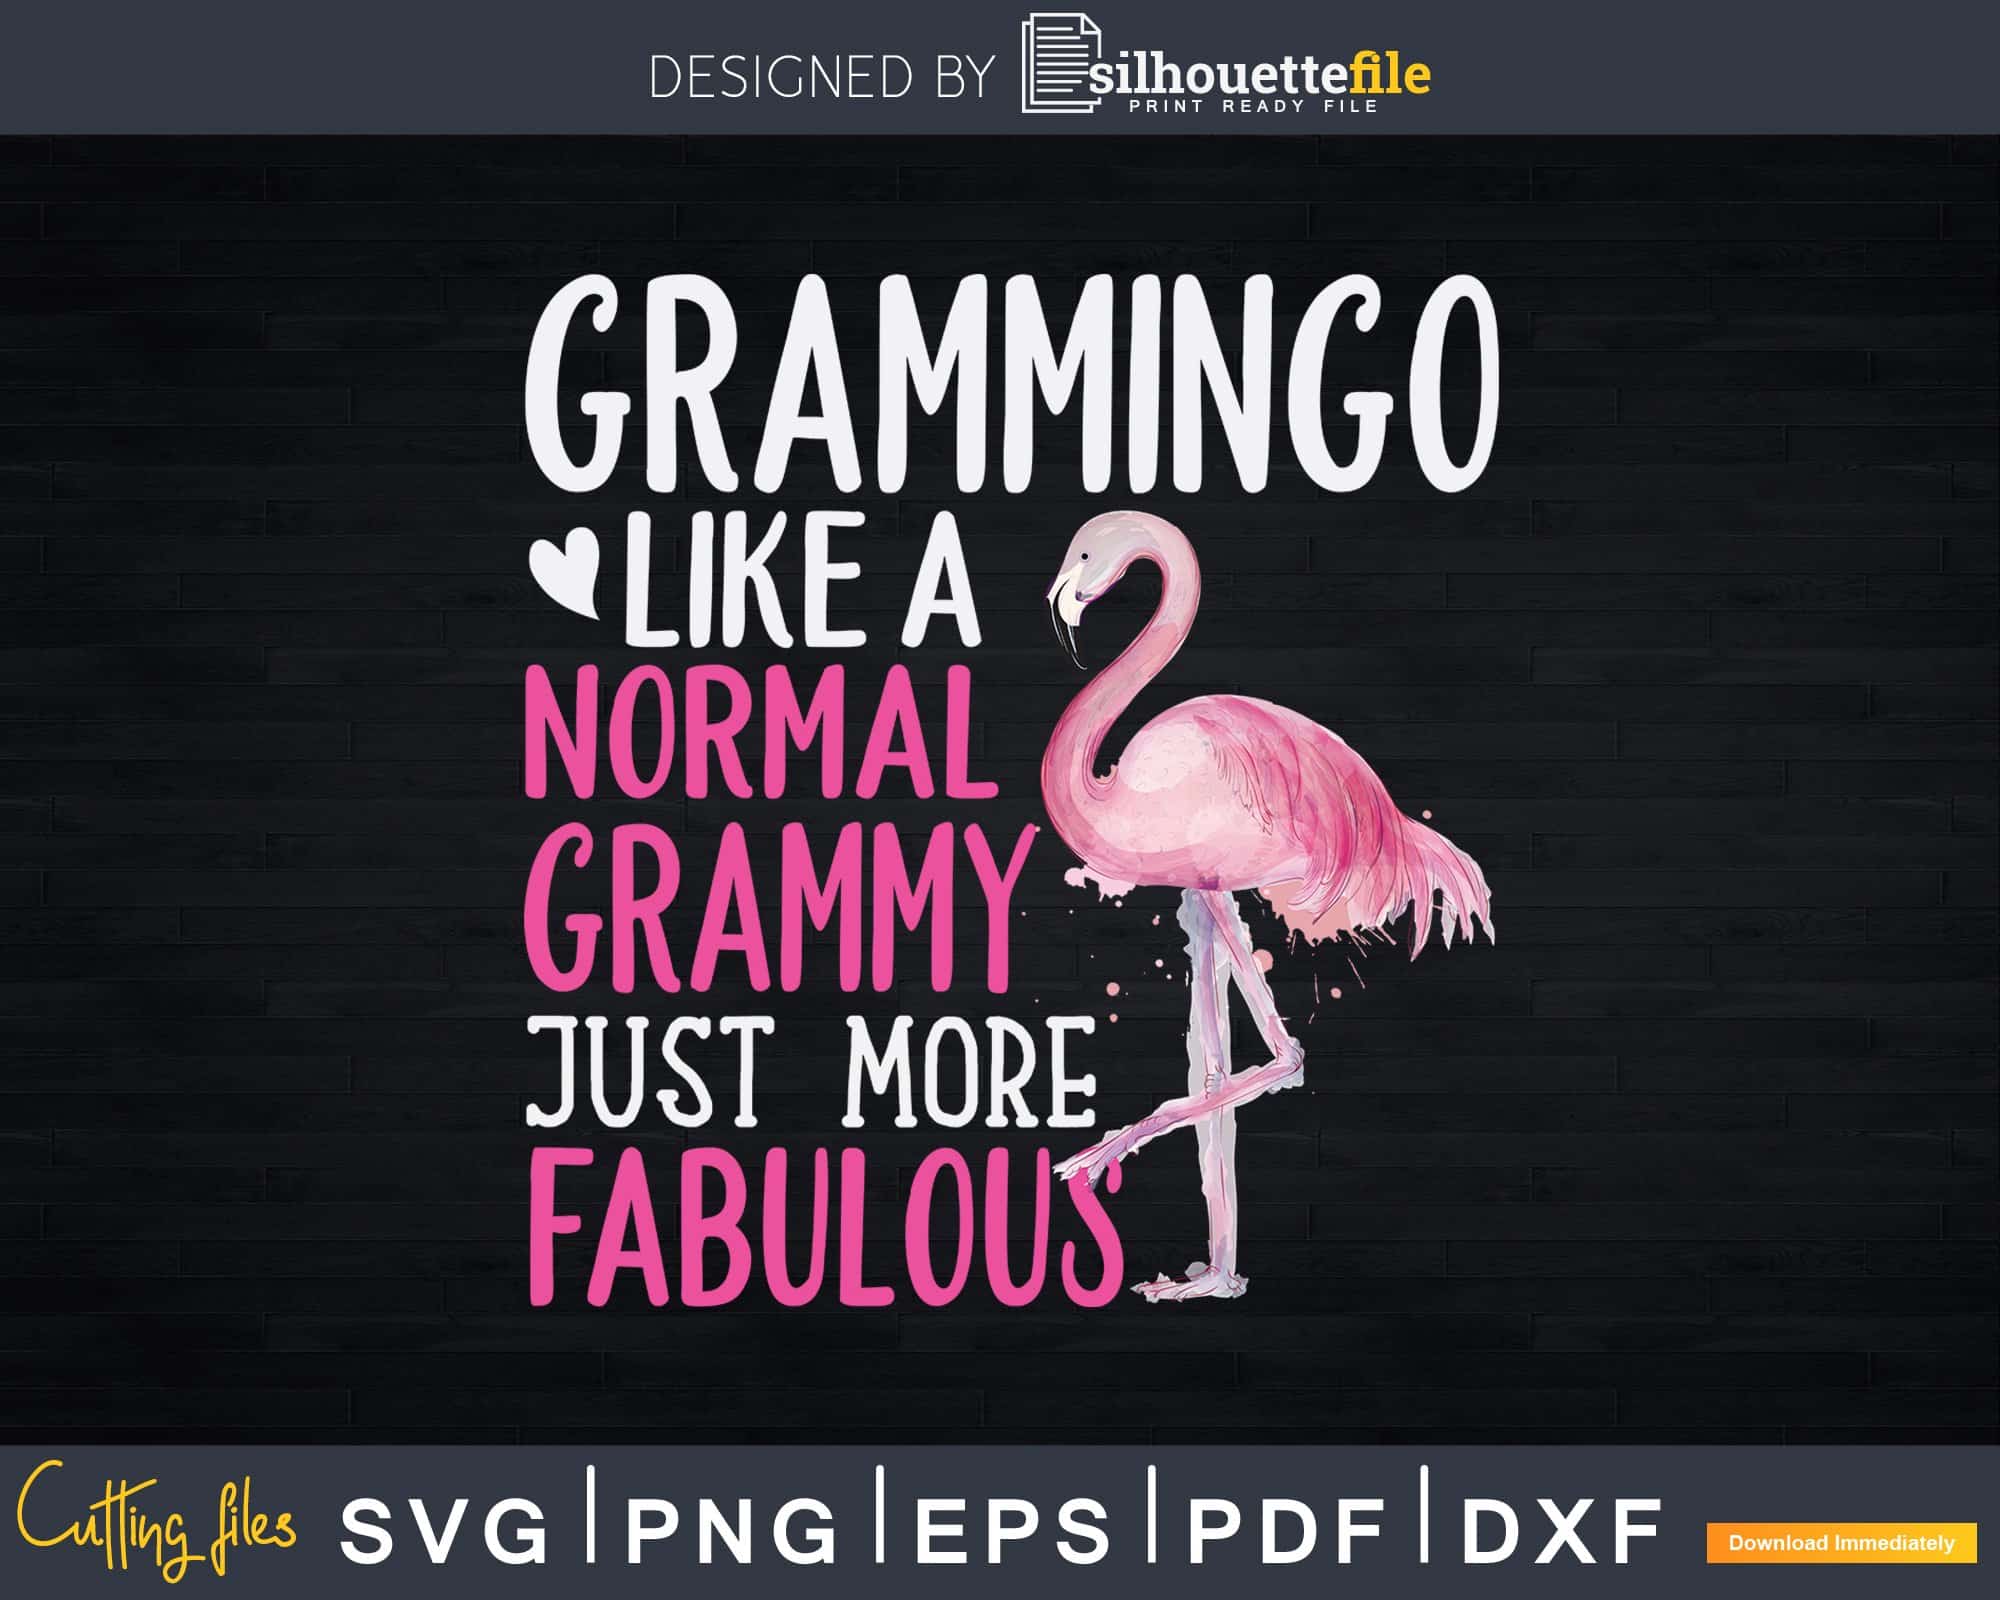 Download Flamingo Grammingo Like A Normal Grammy Svg Png Dxf Digital Files Silhouettefile